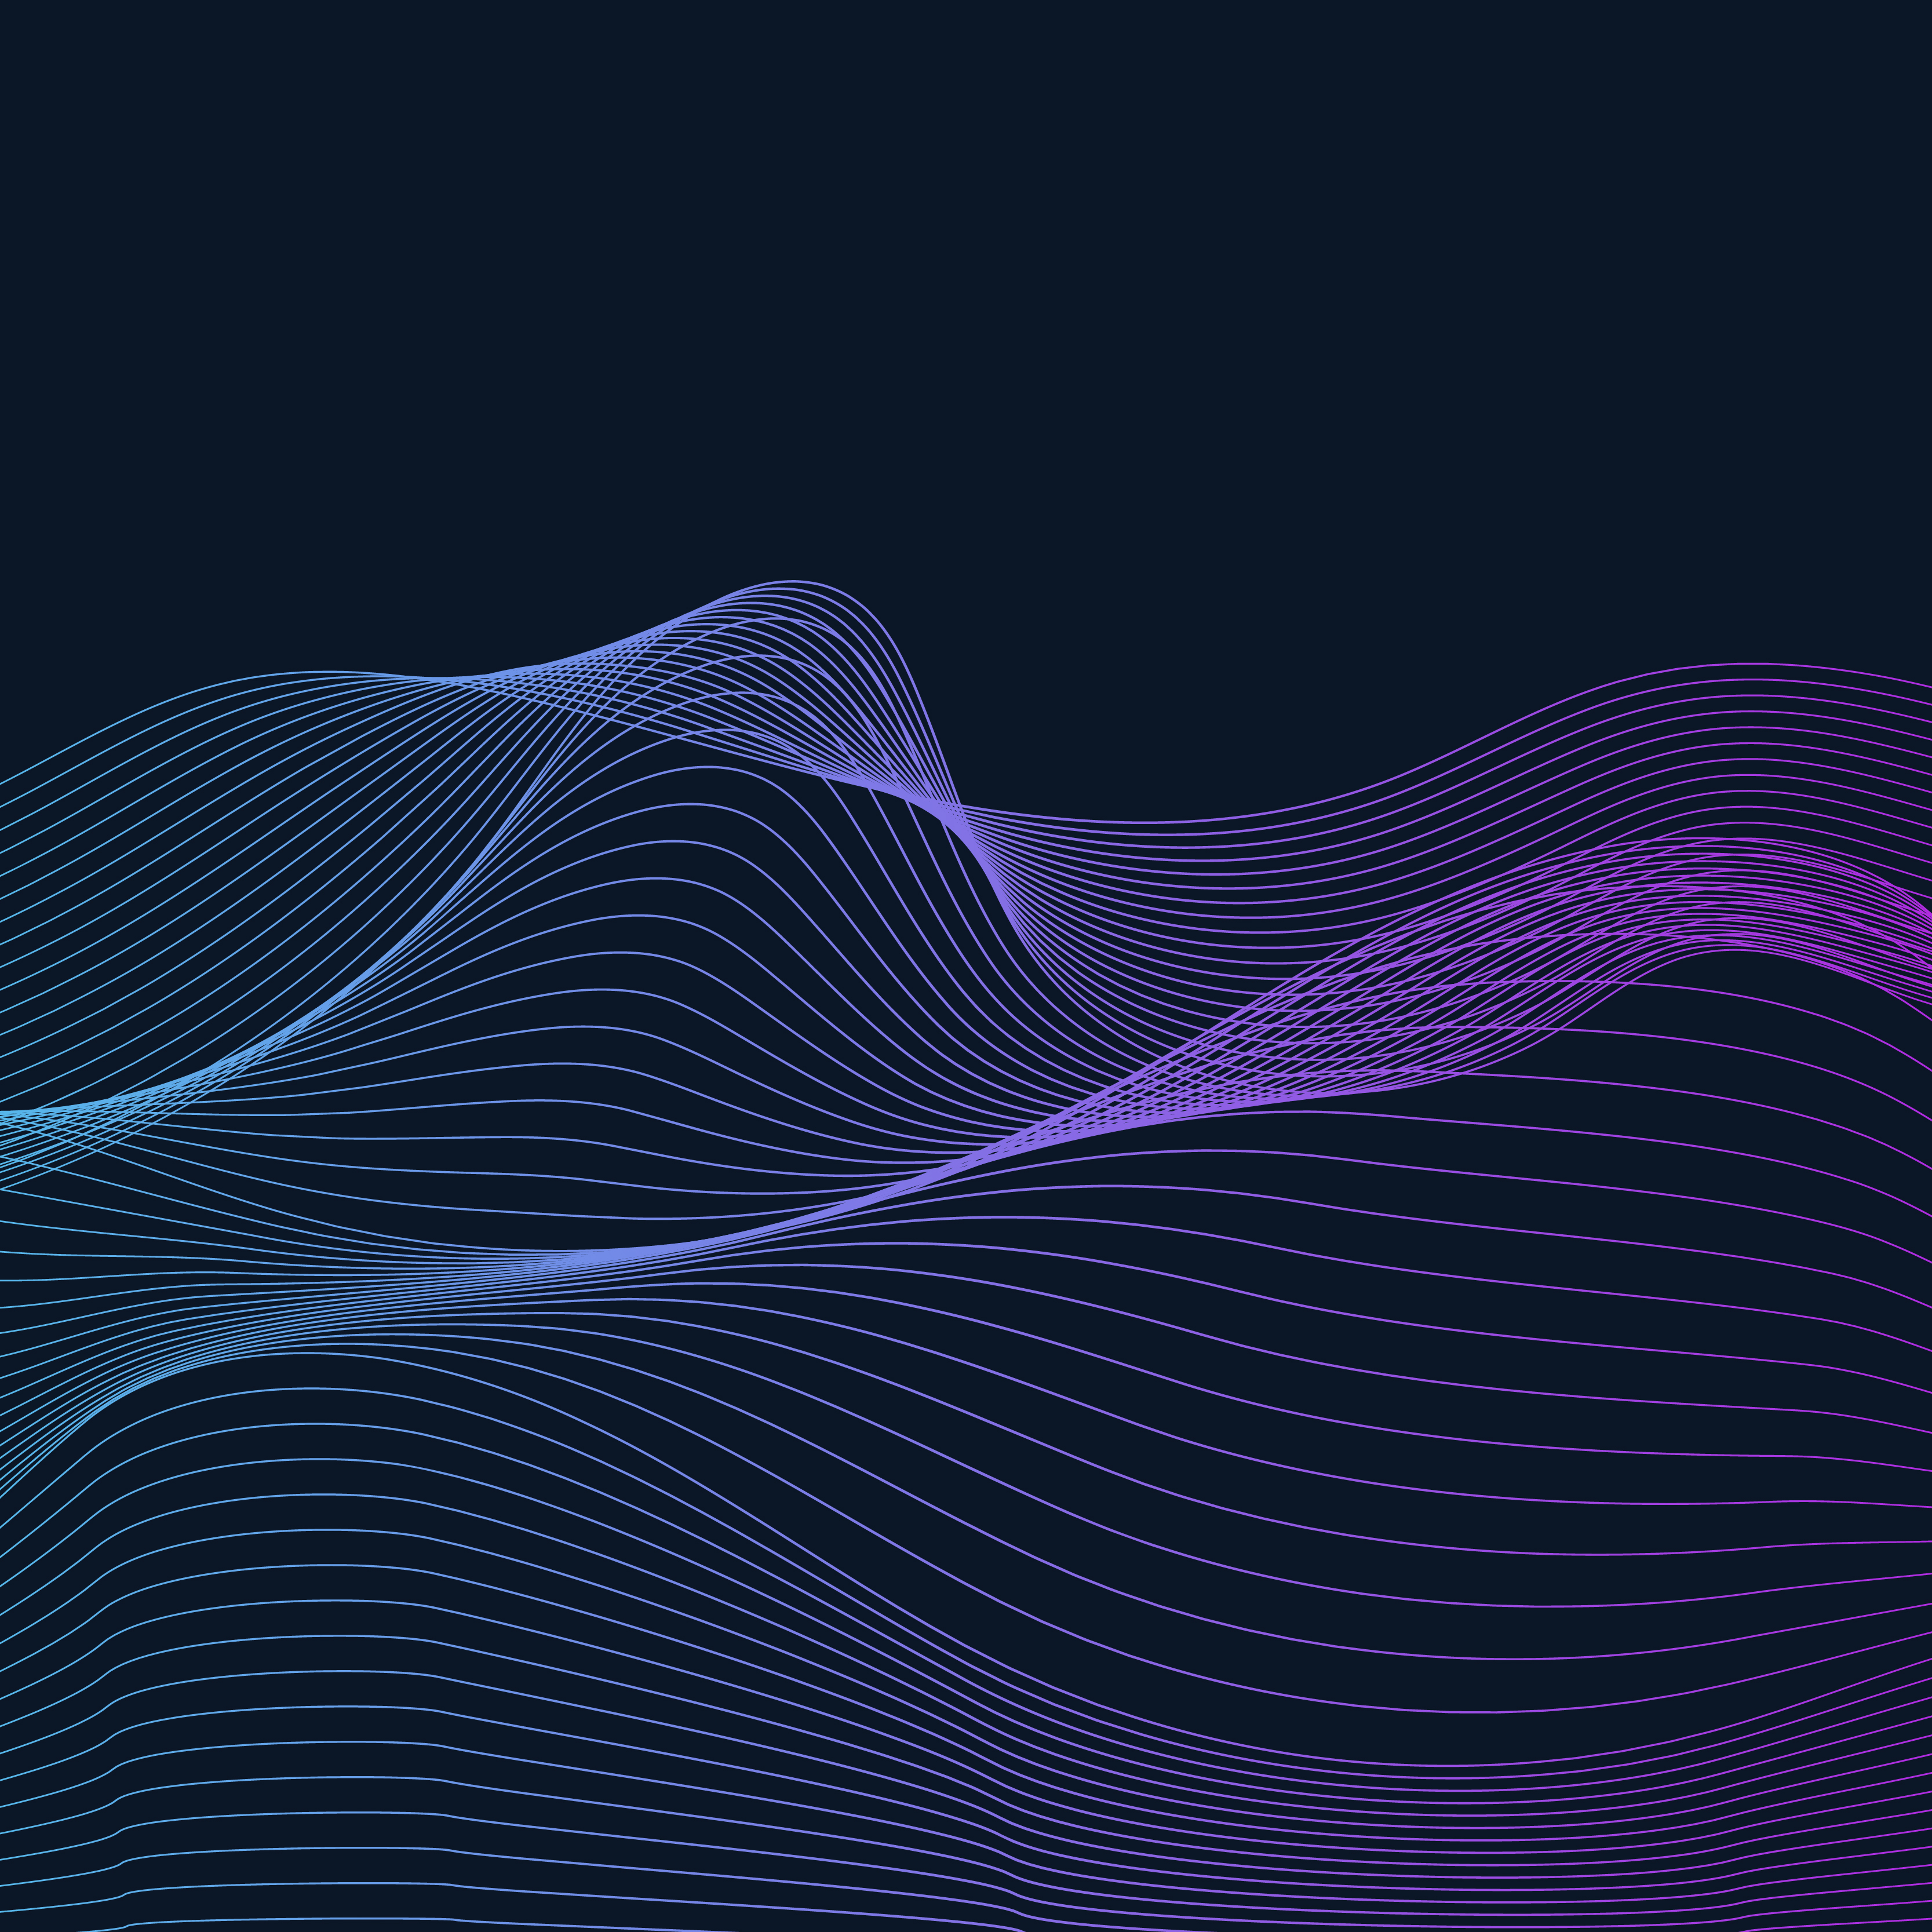 Data visualization dynamic wave pattern vector - Download Free Vectors